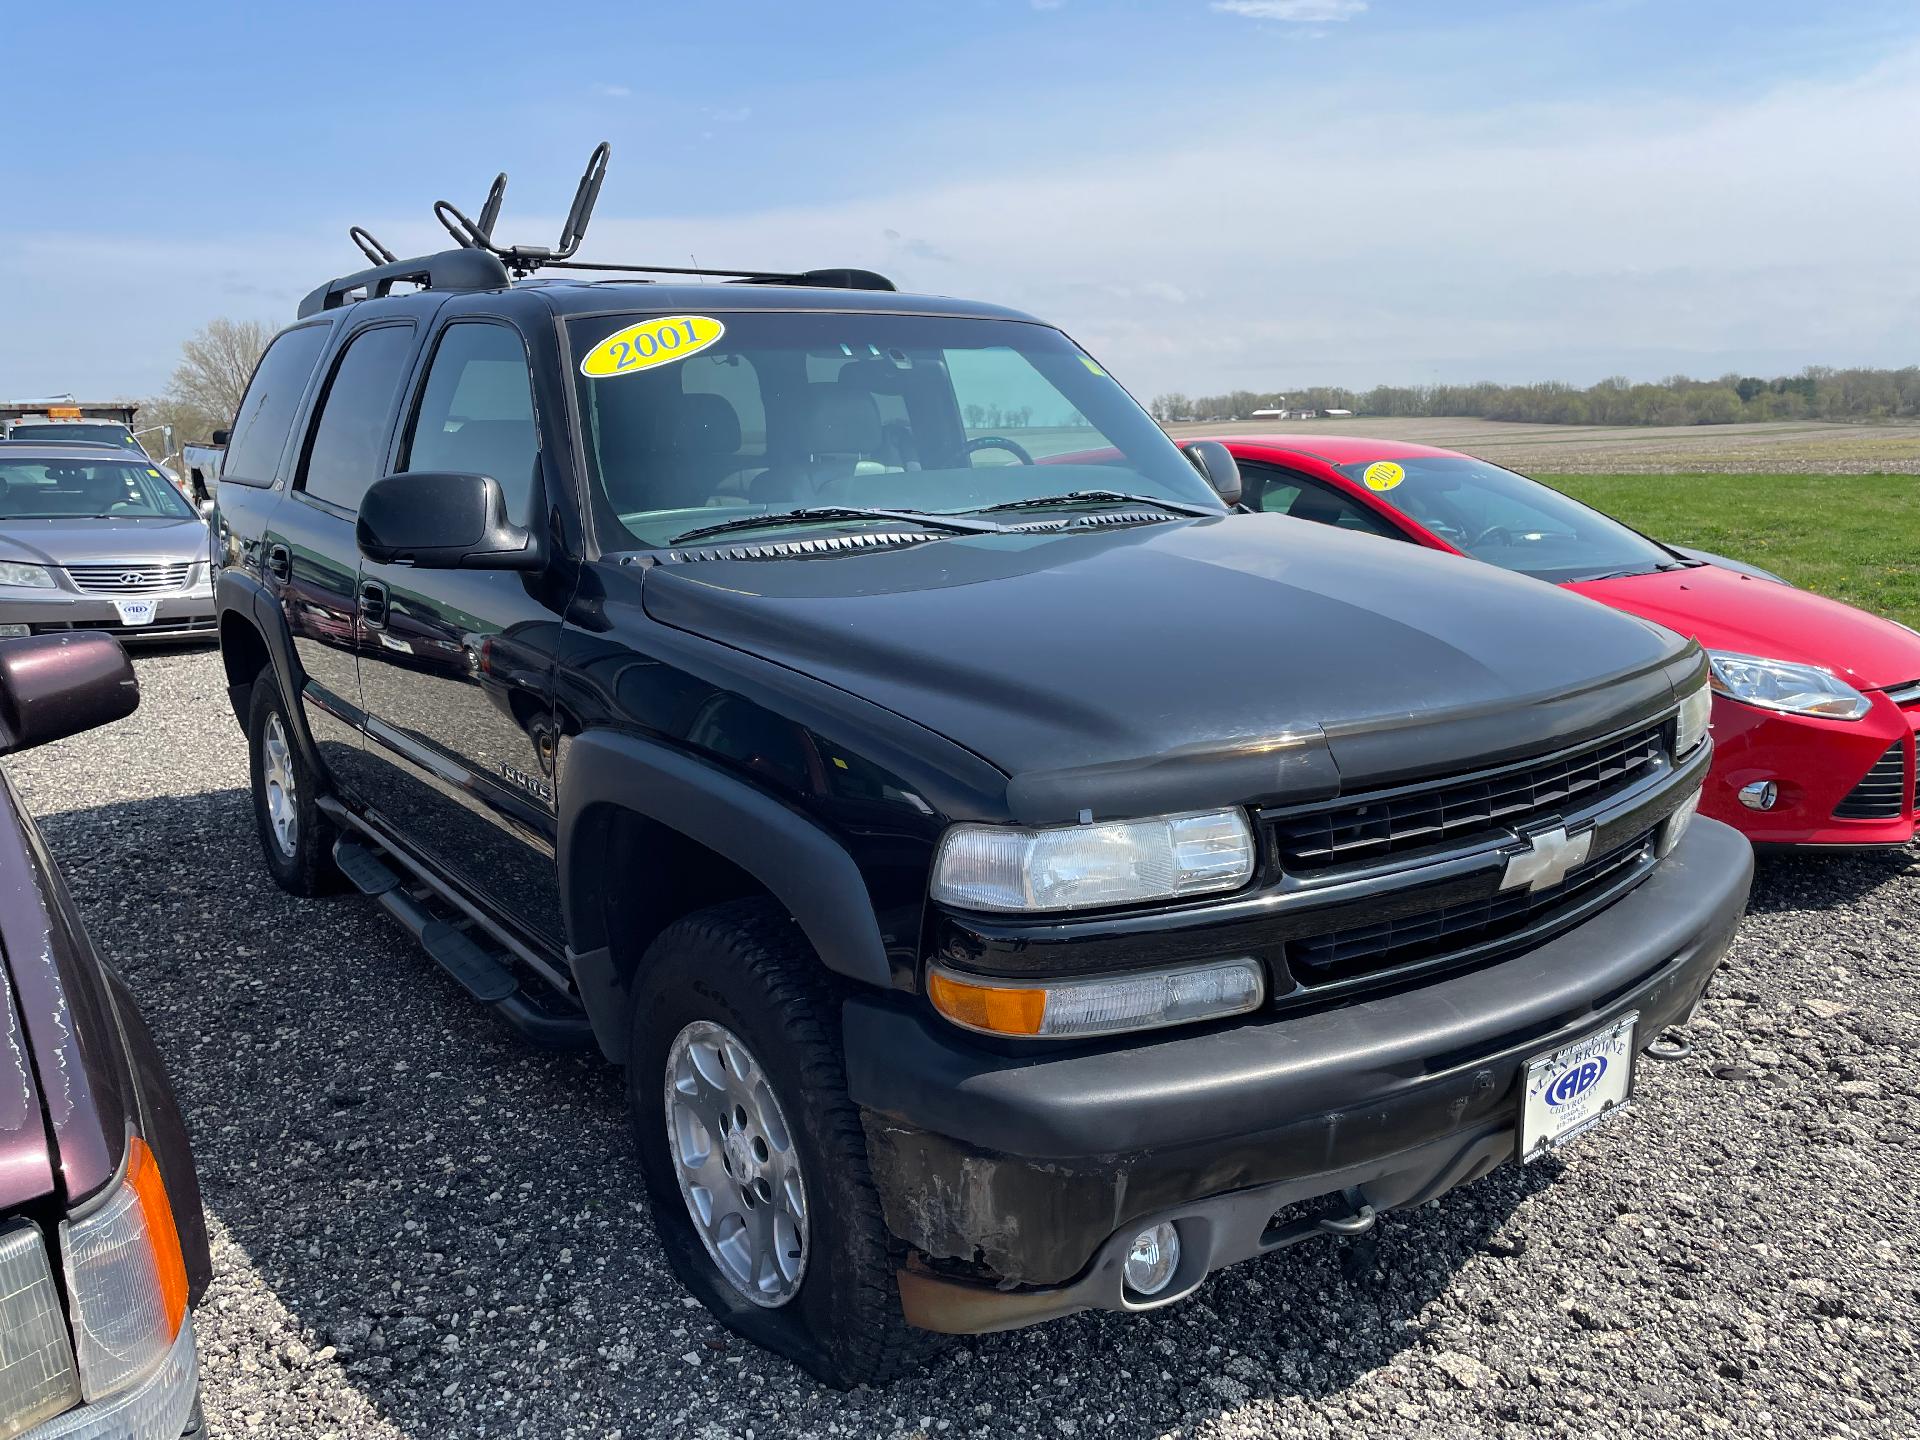 Used 2001 Chevrolet Tahoe Base with VIN 1GNEK13T41R197576 for sale in Genoa, IL